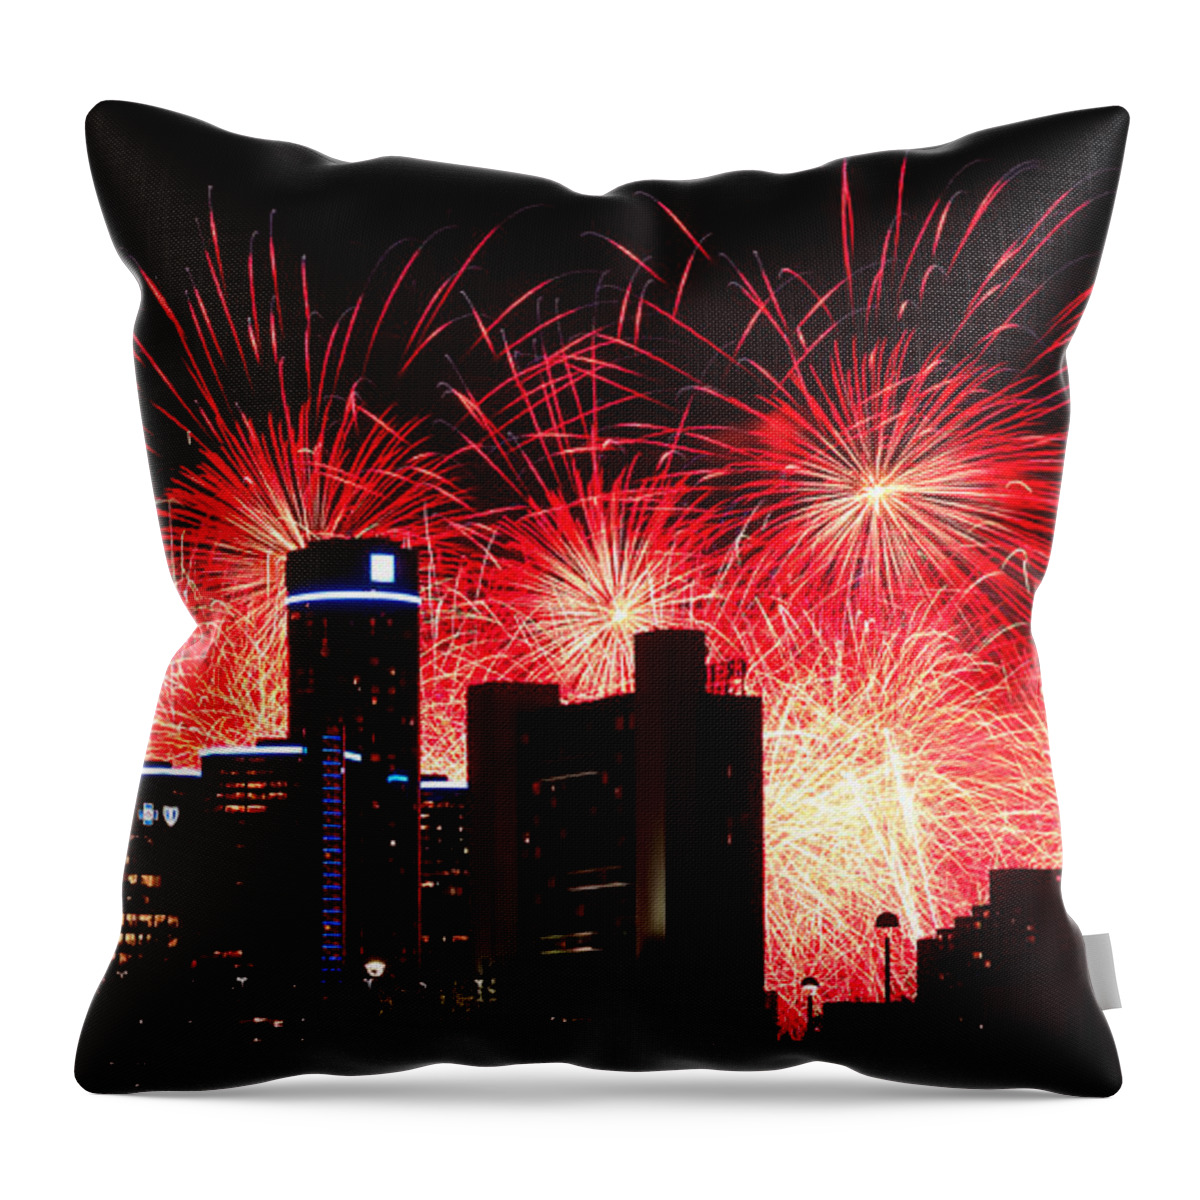 The Throw Pillow featuring the photograph The 54th Annual Target Fireworks in Detroit Michigan - Version 2 by Gordon Dean II